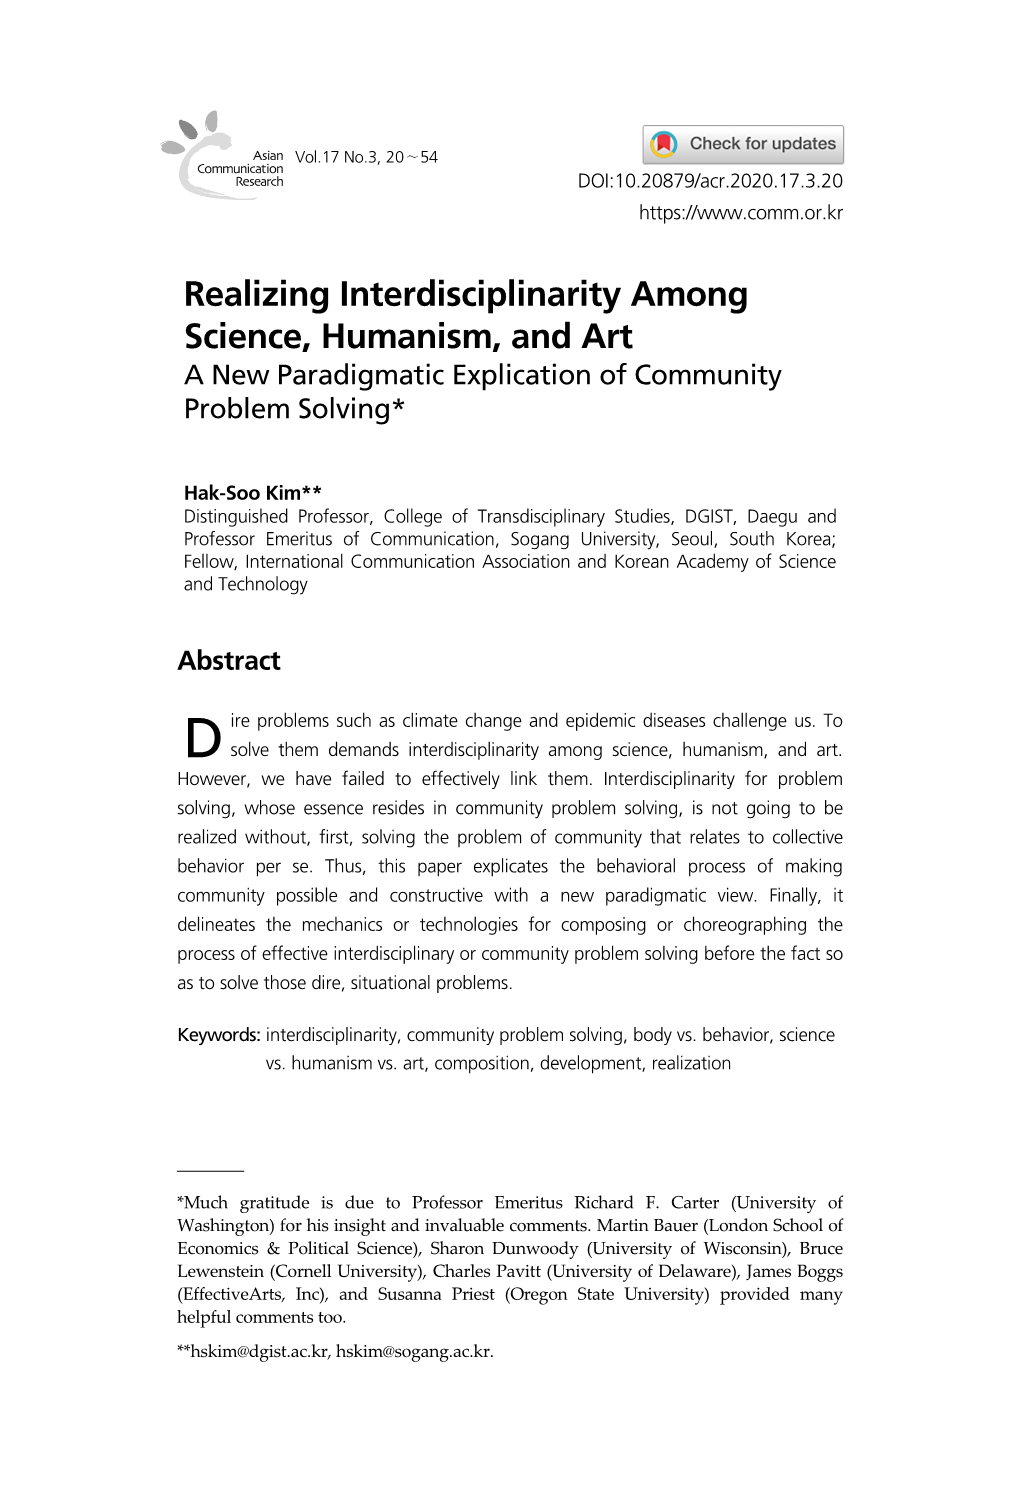 Realizing Interdisciplinarity Among Science, Humanism, and Art a New Paradigmatic Explication of Community Problem Solving*